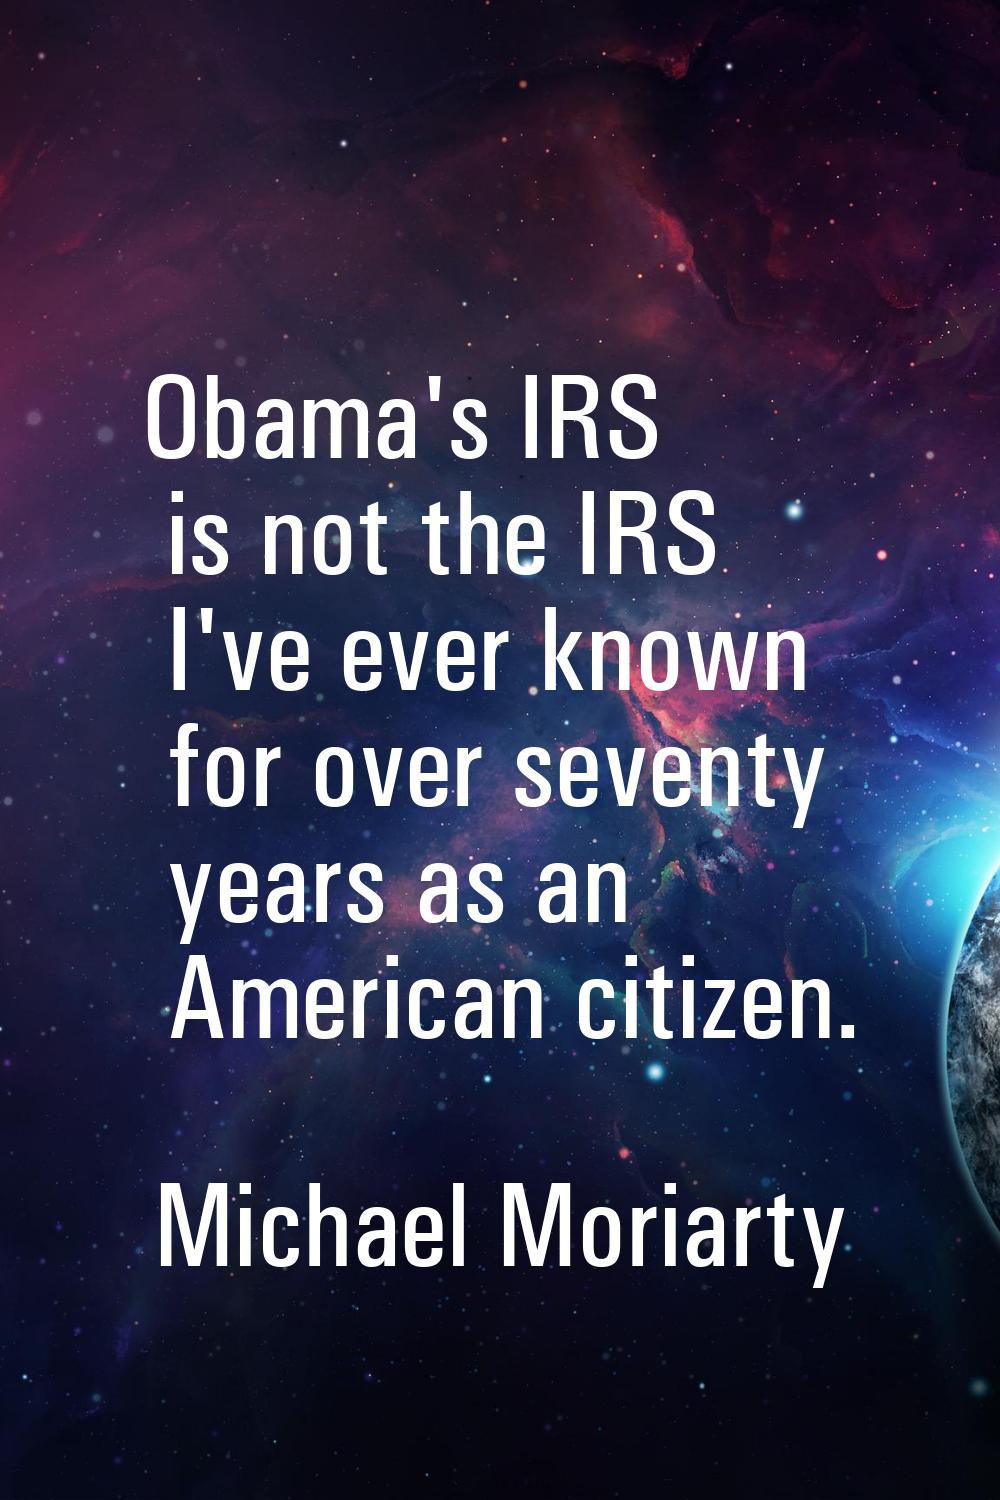 Obama's IRS is not the IRS I've ever known for over seventy years as an American citizen.